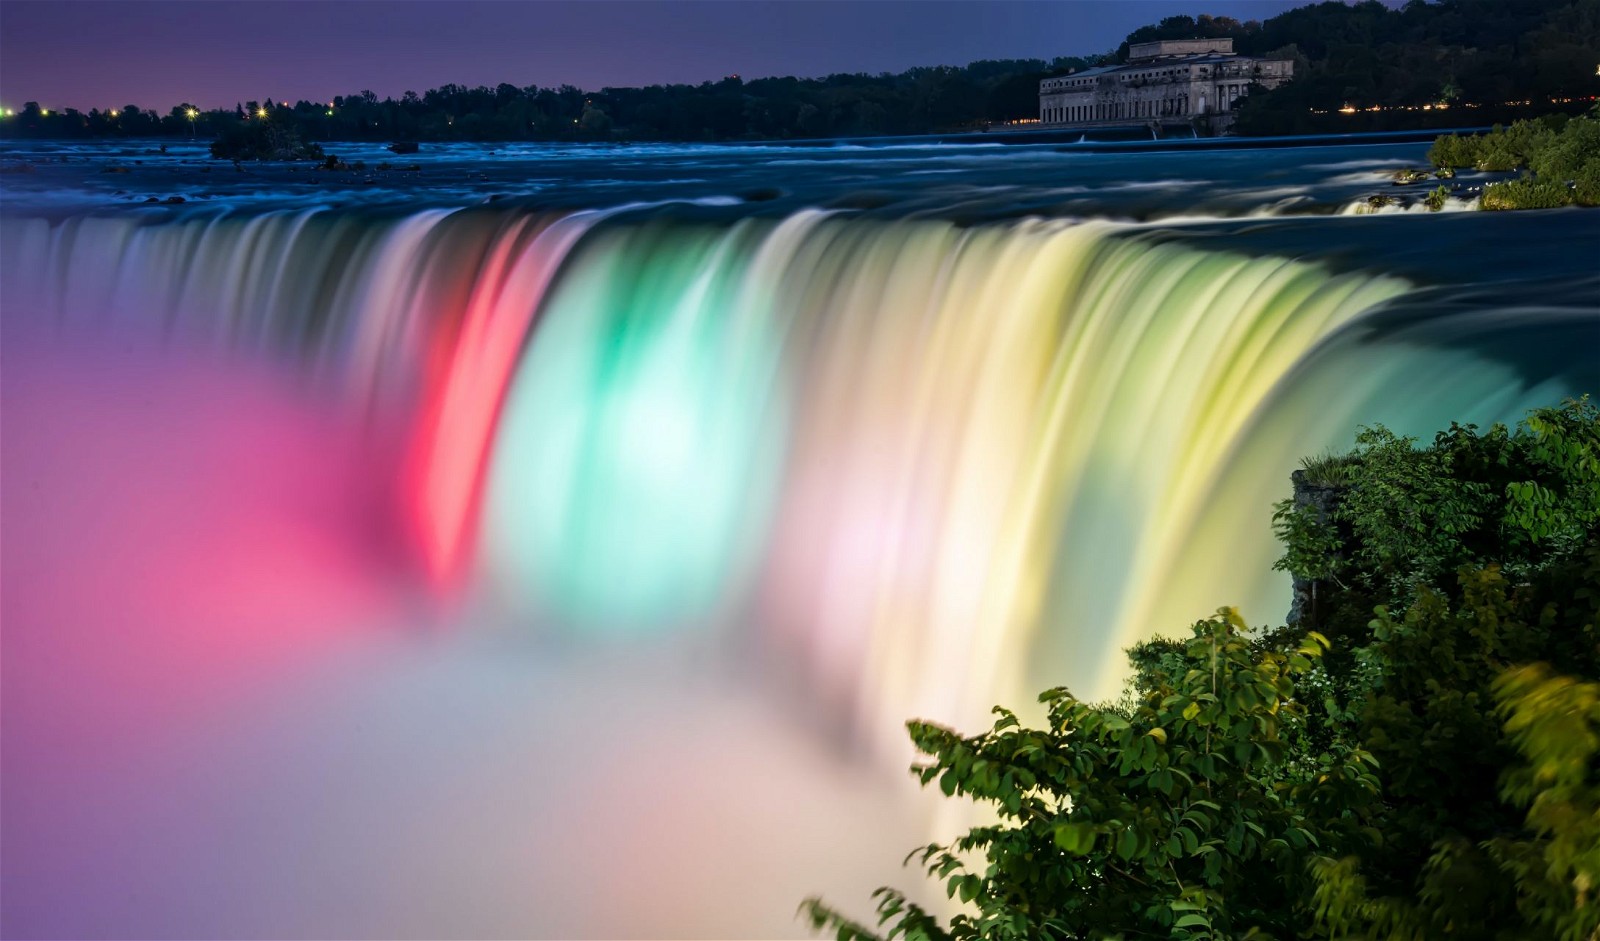 Niagara Falls is a world-famous natural wonder located on the border of Ontario and New York.